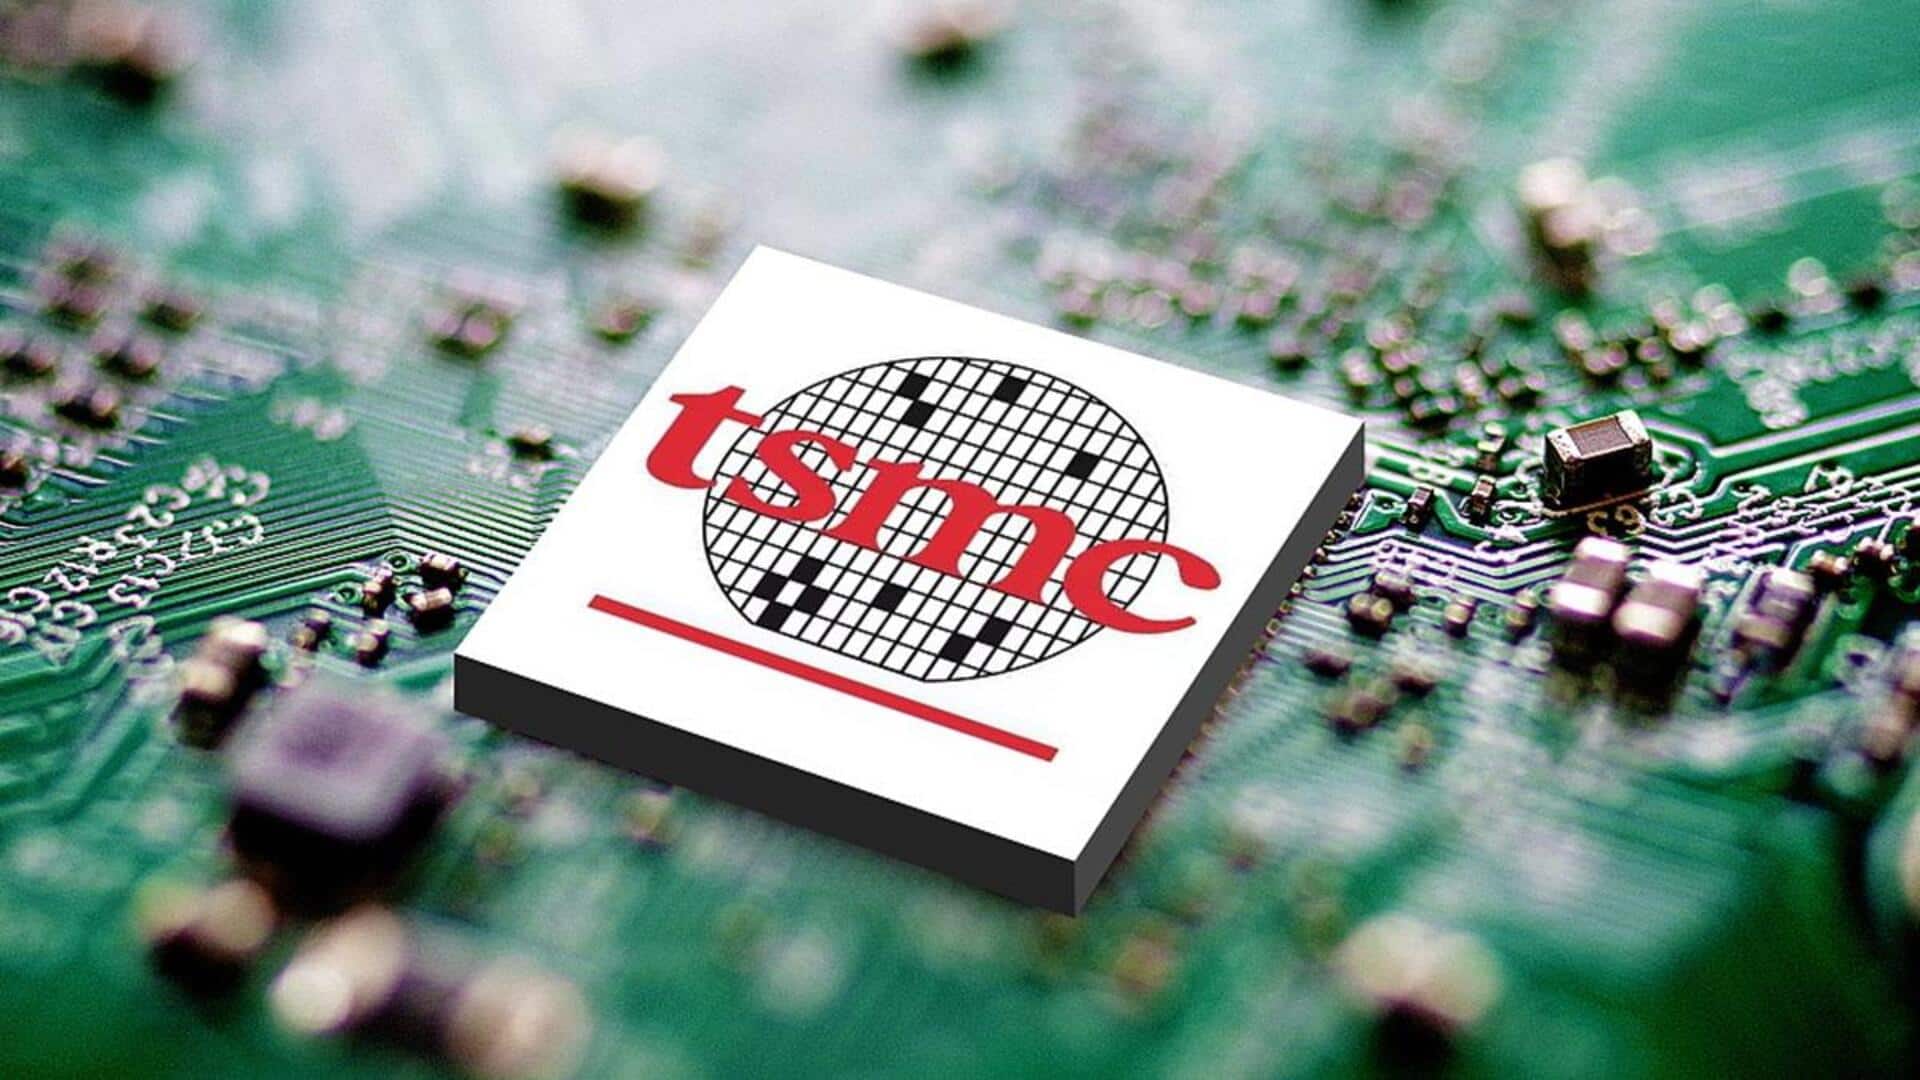 TSMC, world's top chipmaker, to build second factory in Japan